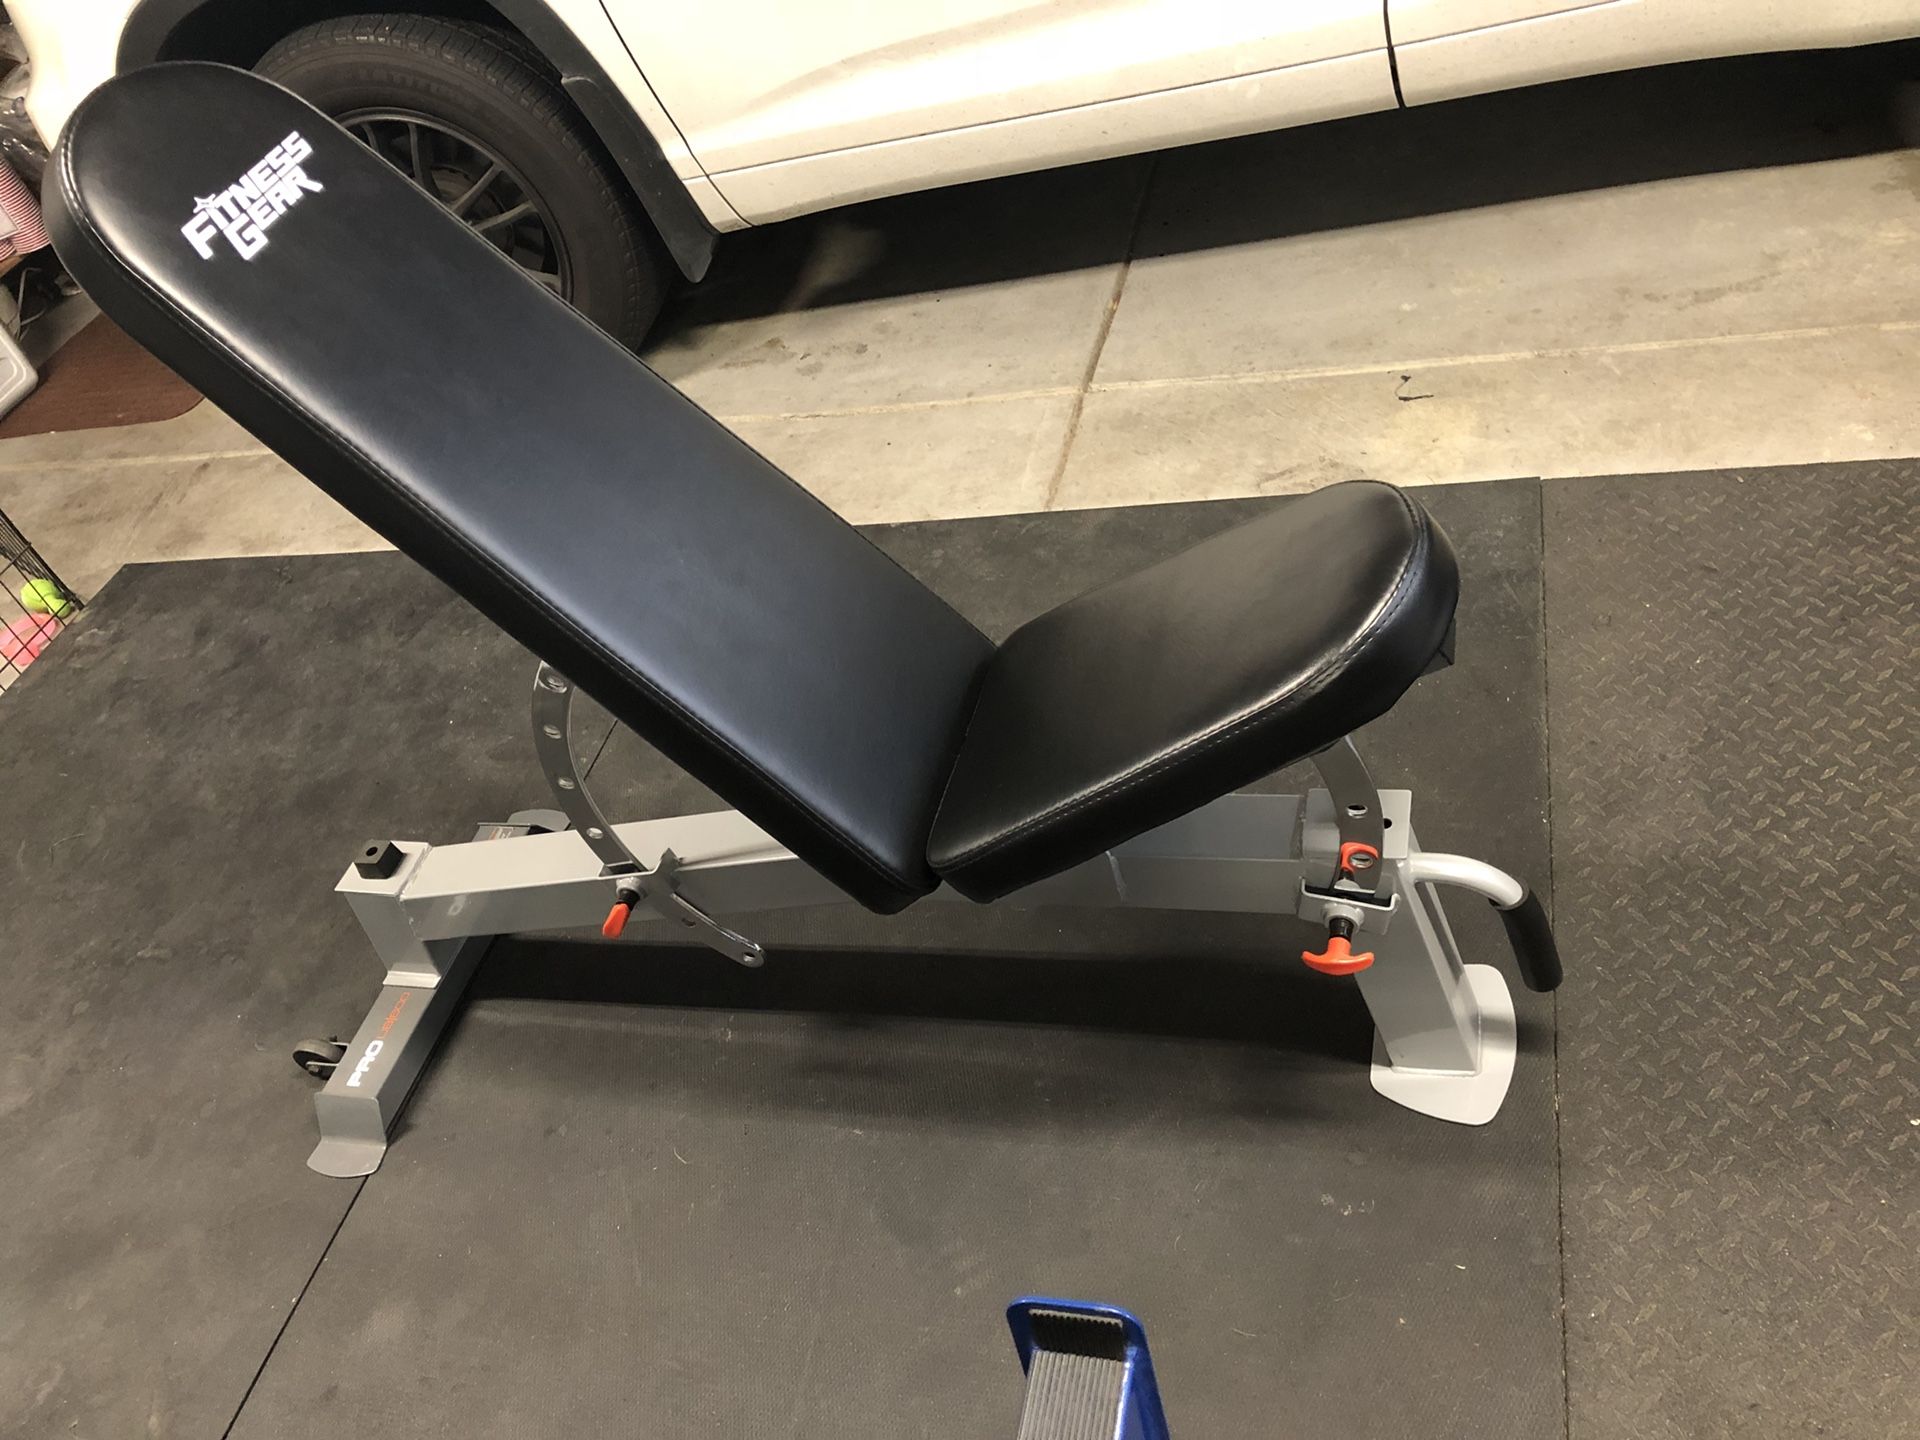 Selling A Lightly Used Fitness Gear Pro Ub600 Utility Fid Weight Bench Which Retails For 180 For Sale In San Jose